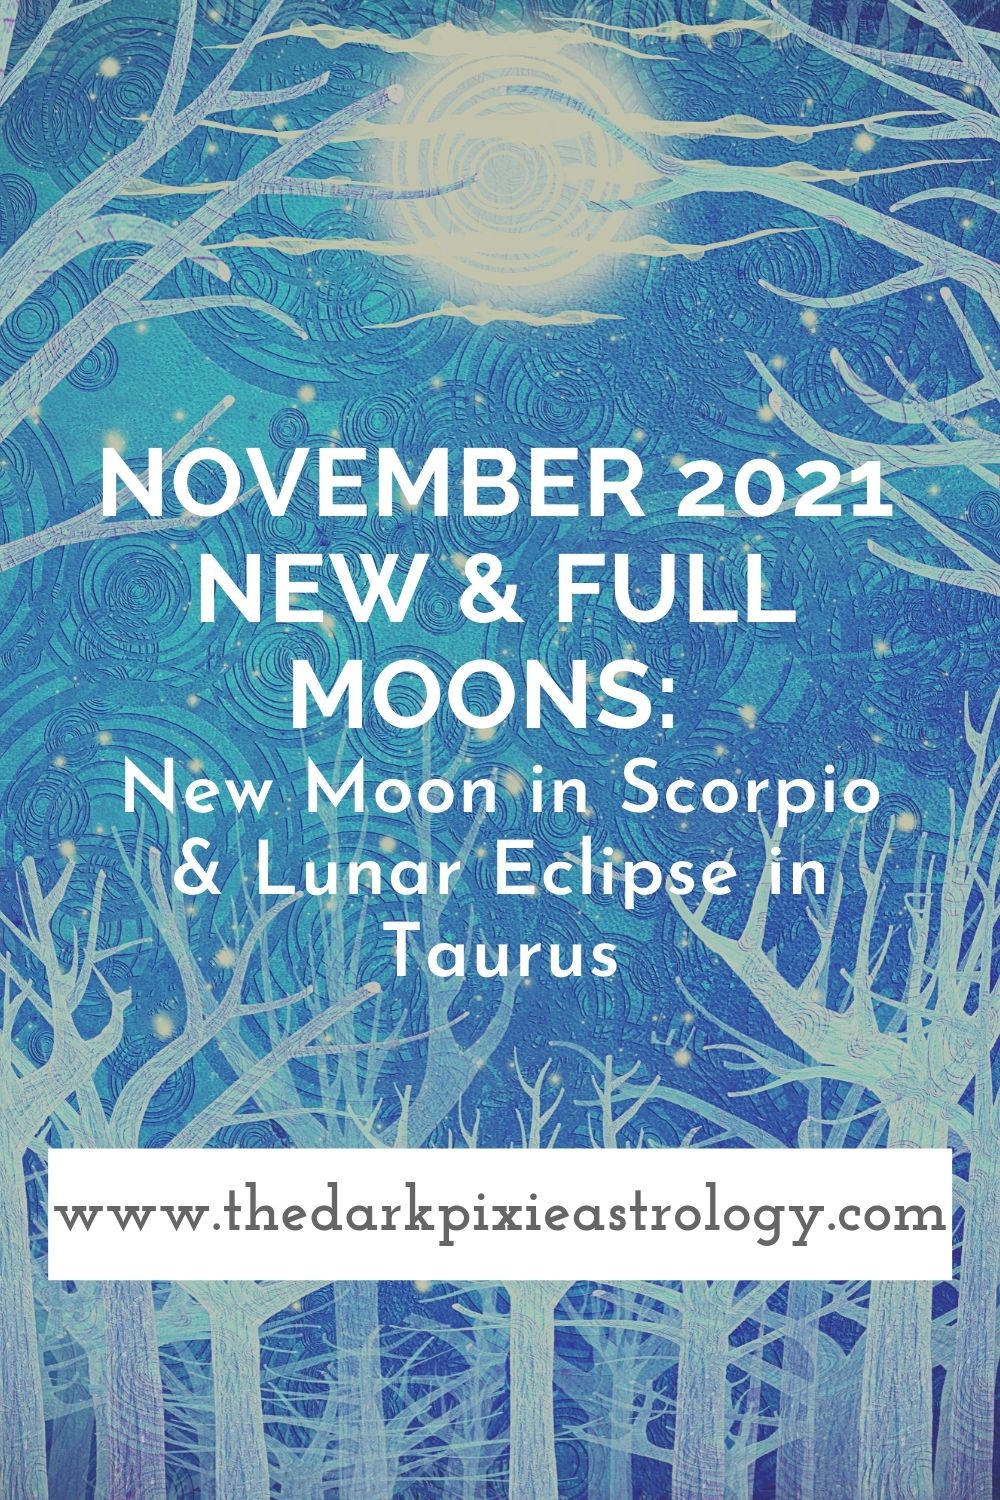 November 2021 New & Full Moons New Moon in Scorpio & Lunar Eclipse in